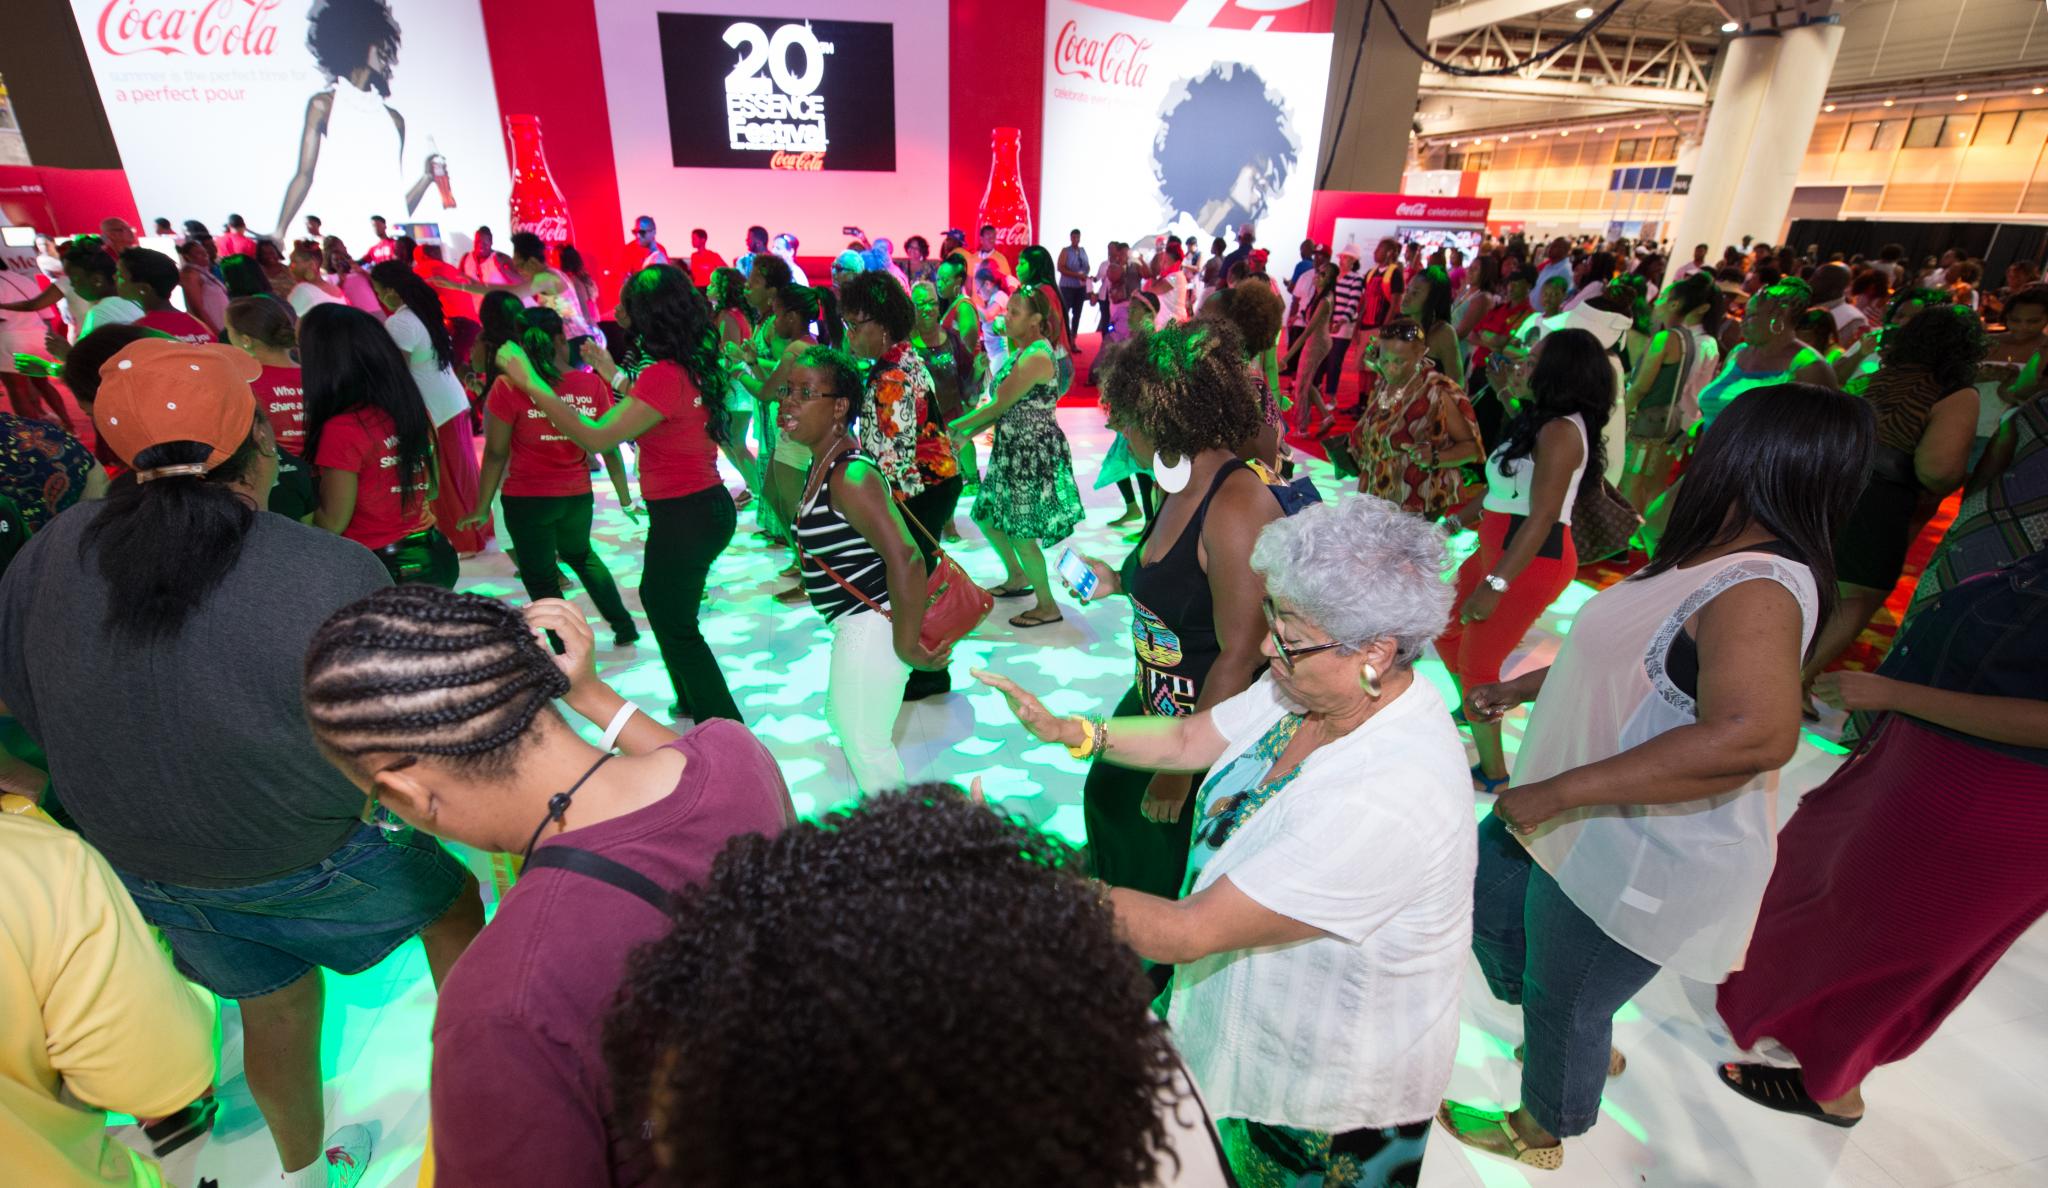 Why the 2014 ESSENCE Festival Was One for the Books